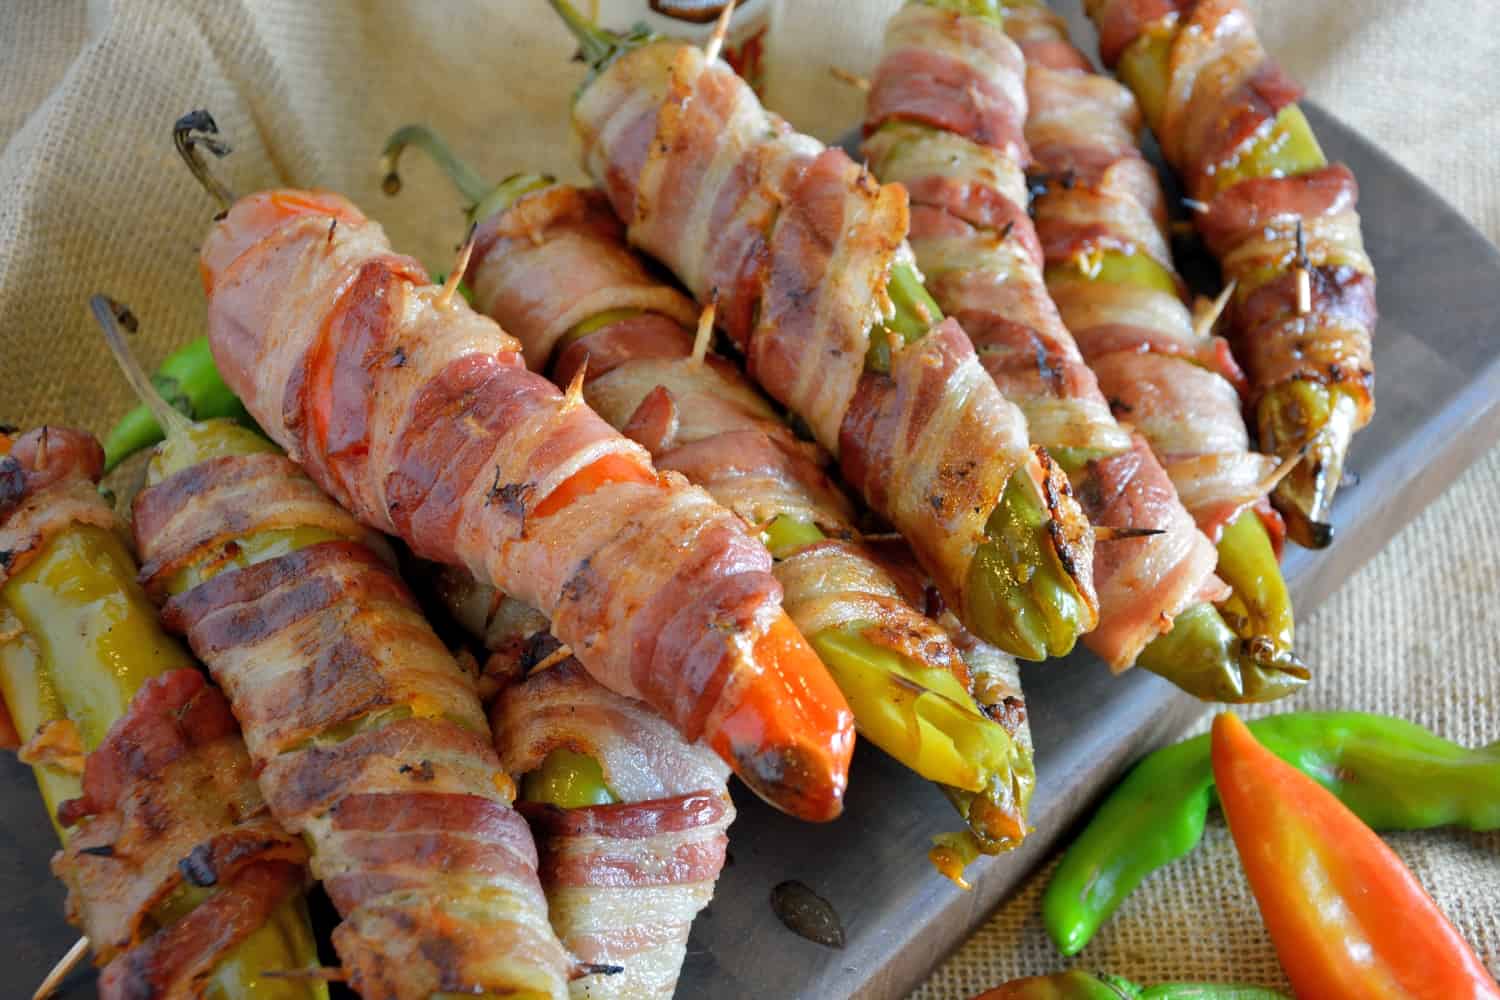 Bacon Wrapped BBQ Chicken Stuffed Chile Peppers Recipe- shredded chicken tossed in your choice of BBQ sauce and sharp cheddar cheese, stuffed into a large chile, wrapped in bacon and slow grilled. As seen on Fox News!